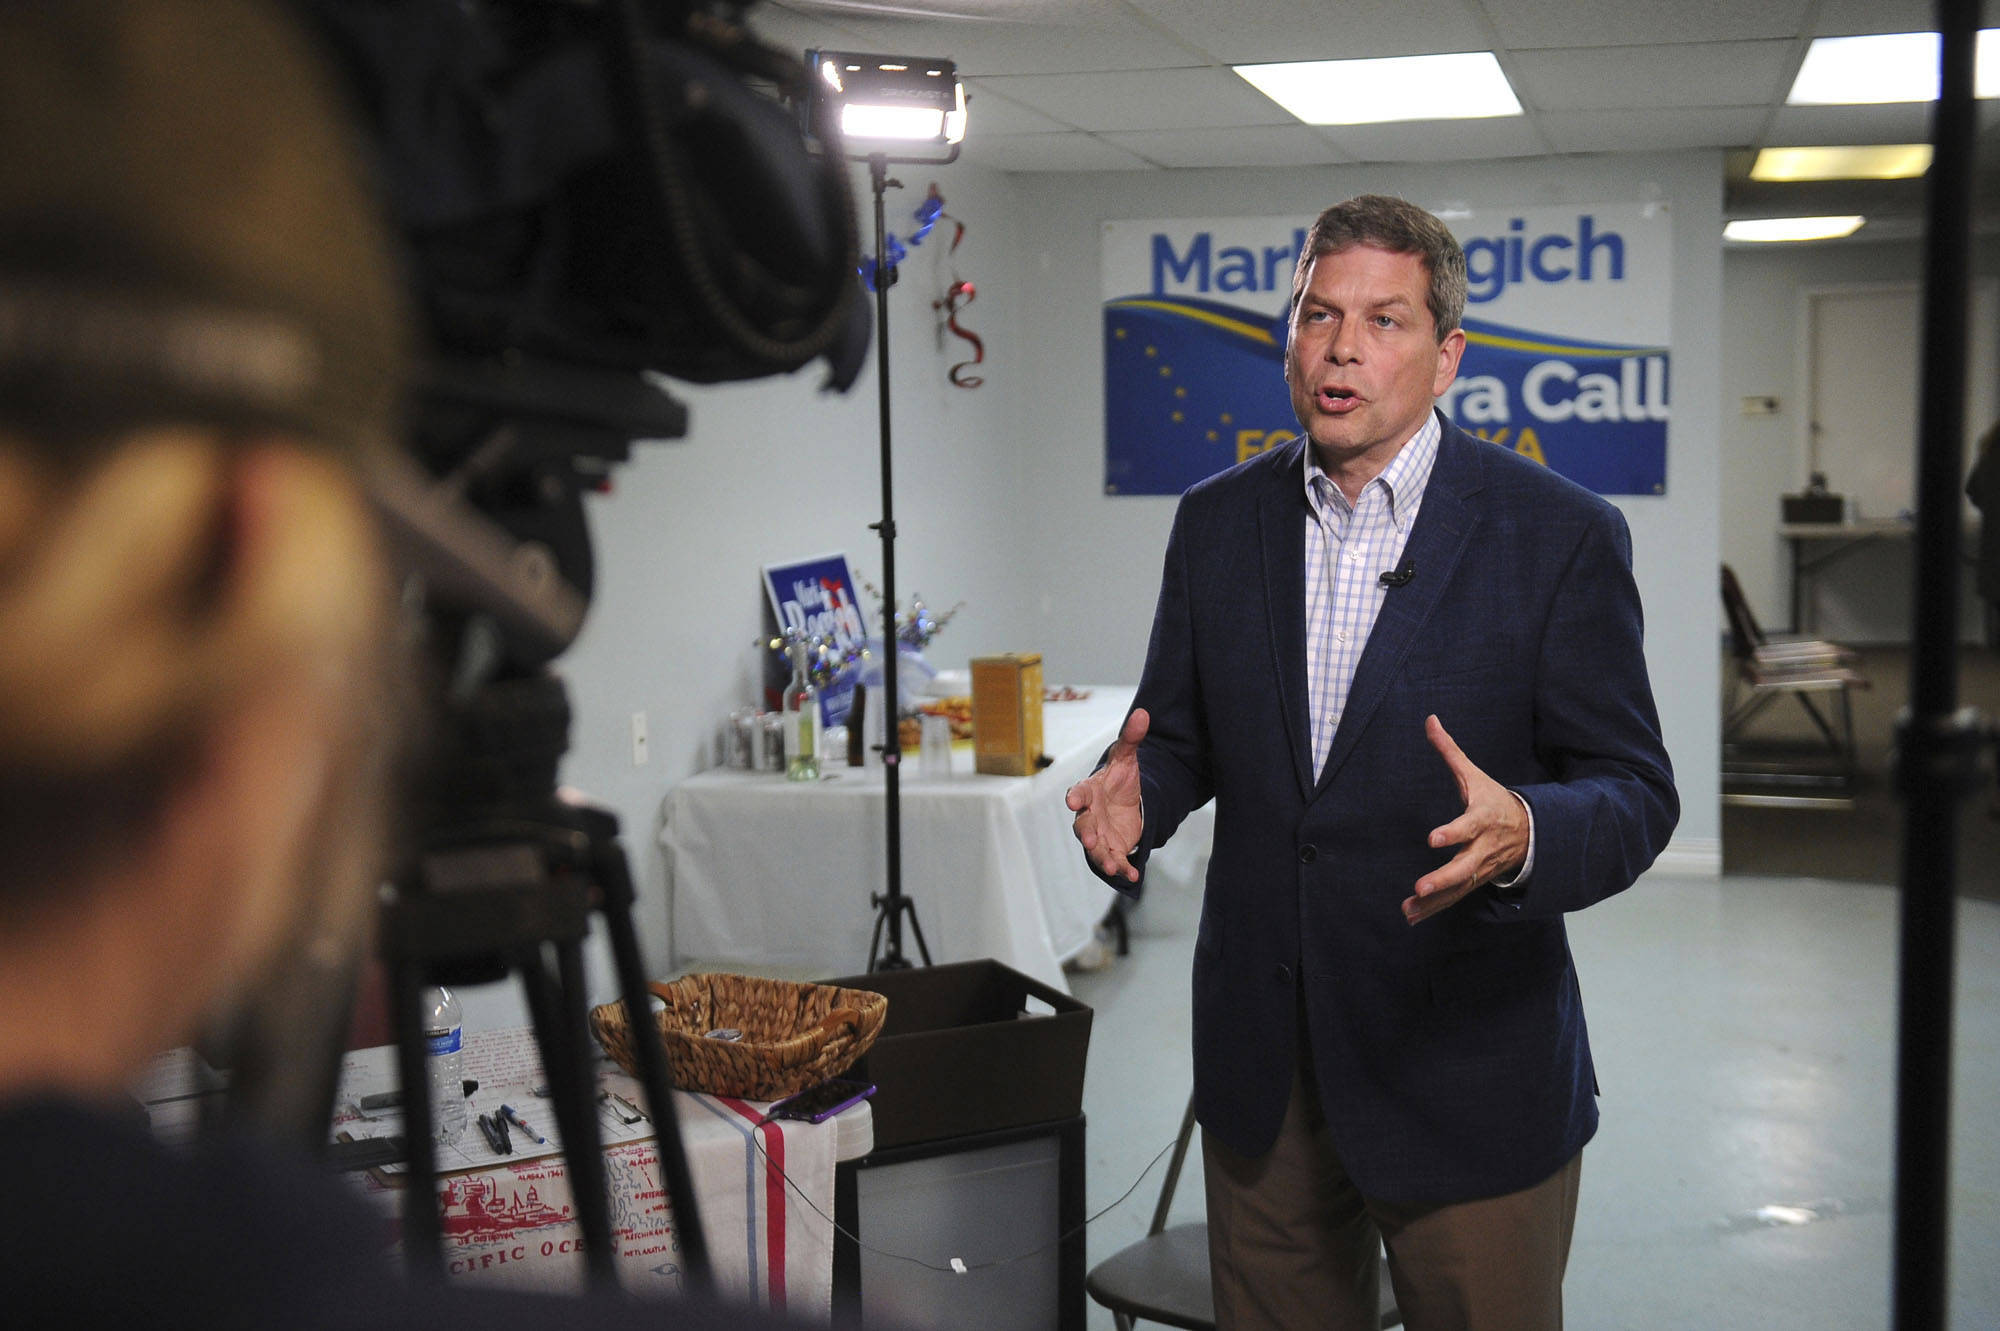 Democratic gubernatorial candidate Mark Begich is interviewed following his primary victory Tuesday Aug. 21, 2018, in Anchorage, Alaska. Begich, a former U.S. Senator, advances to the general election and is expected to face incumbent Gov. Bill Walker and former state senator Mike Dunleavy. (Michael Dinneen | The Associated Press)